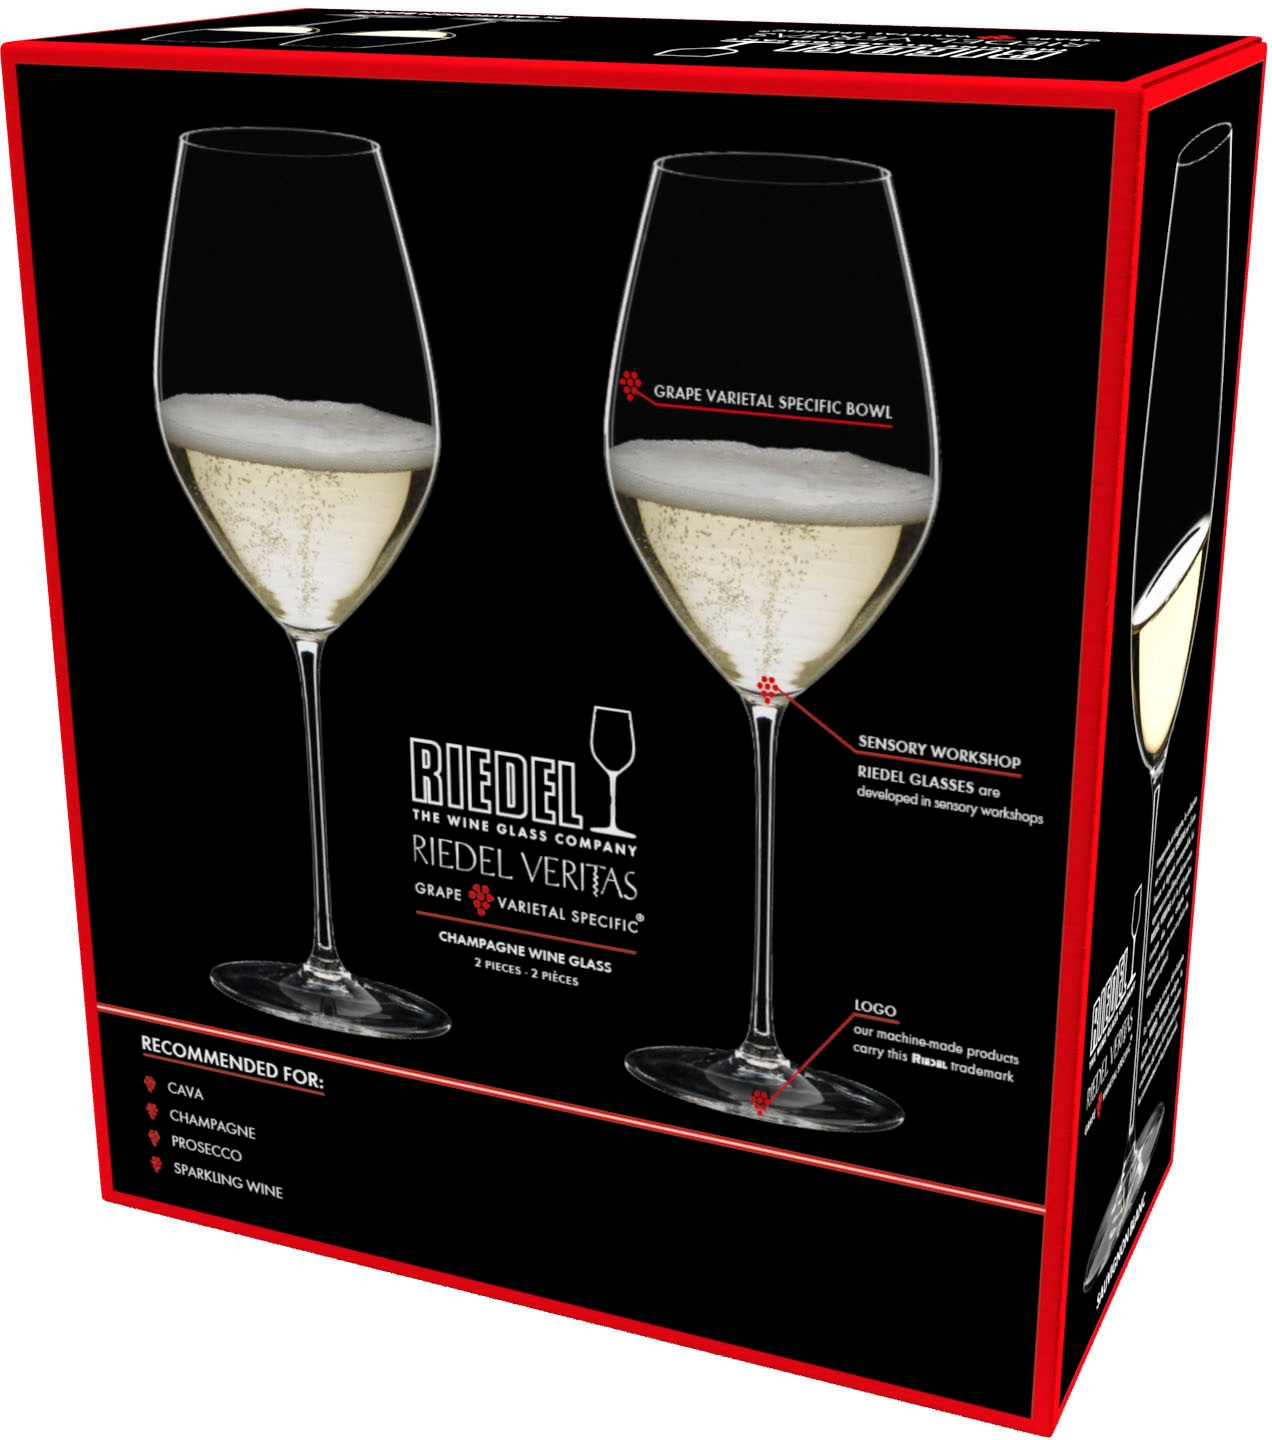 RIEDEL THE WINE GLASS COMPANY Champagnerglas »Veritas«, (Set, 2 tlg.), Made in Germany, 459 ml, 2-teilig